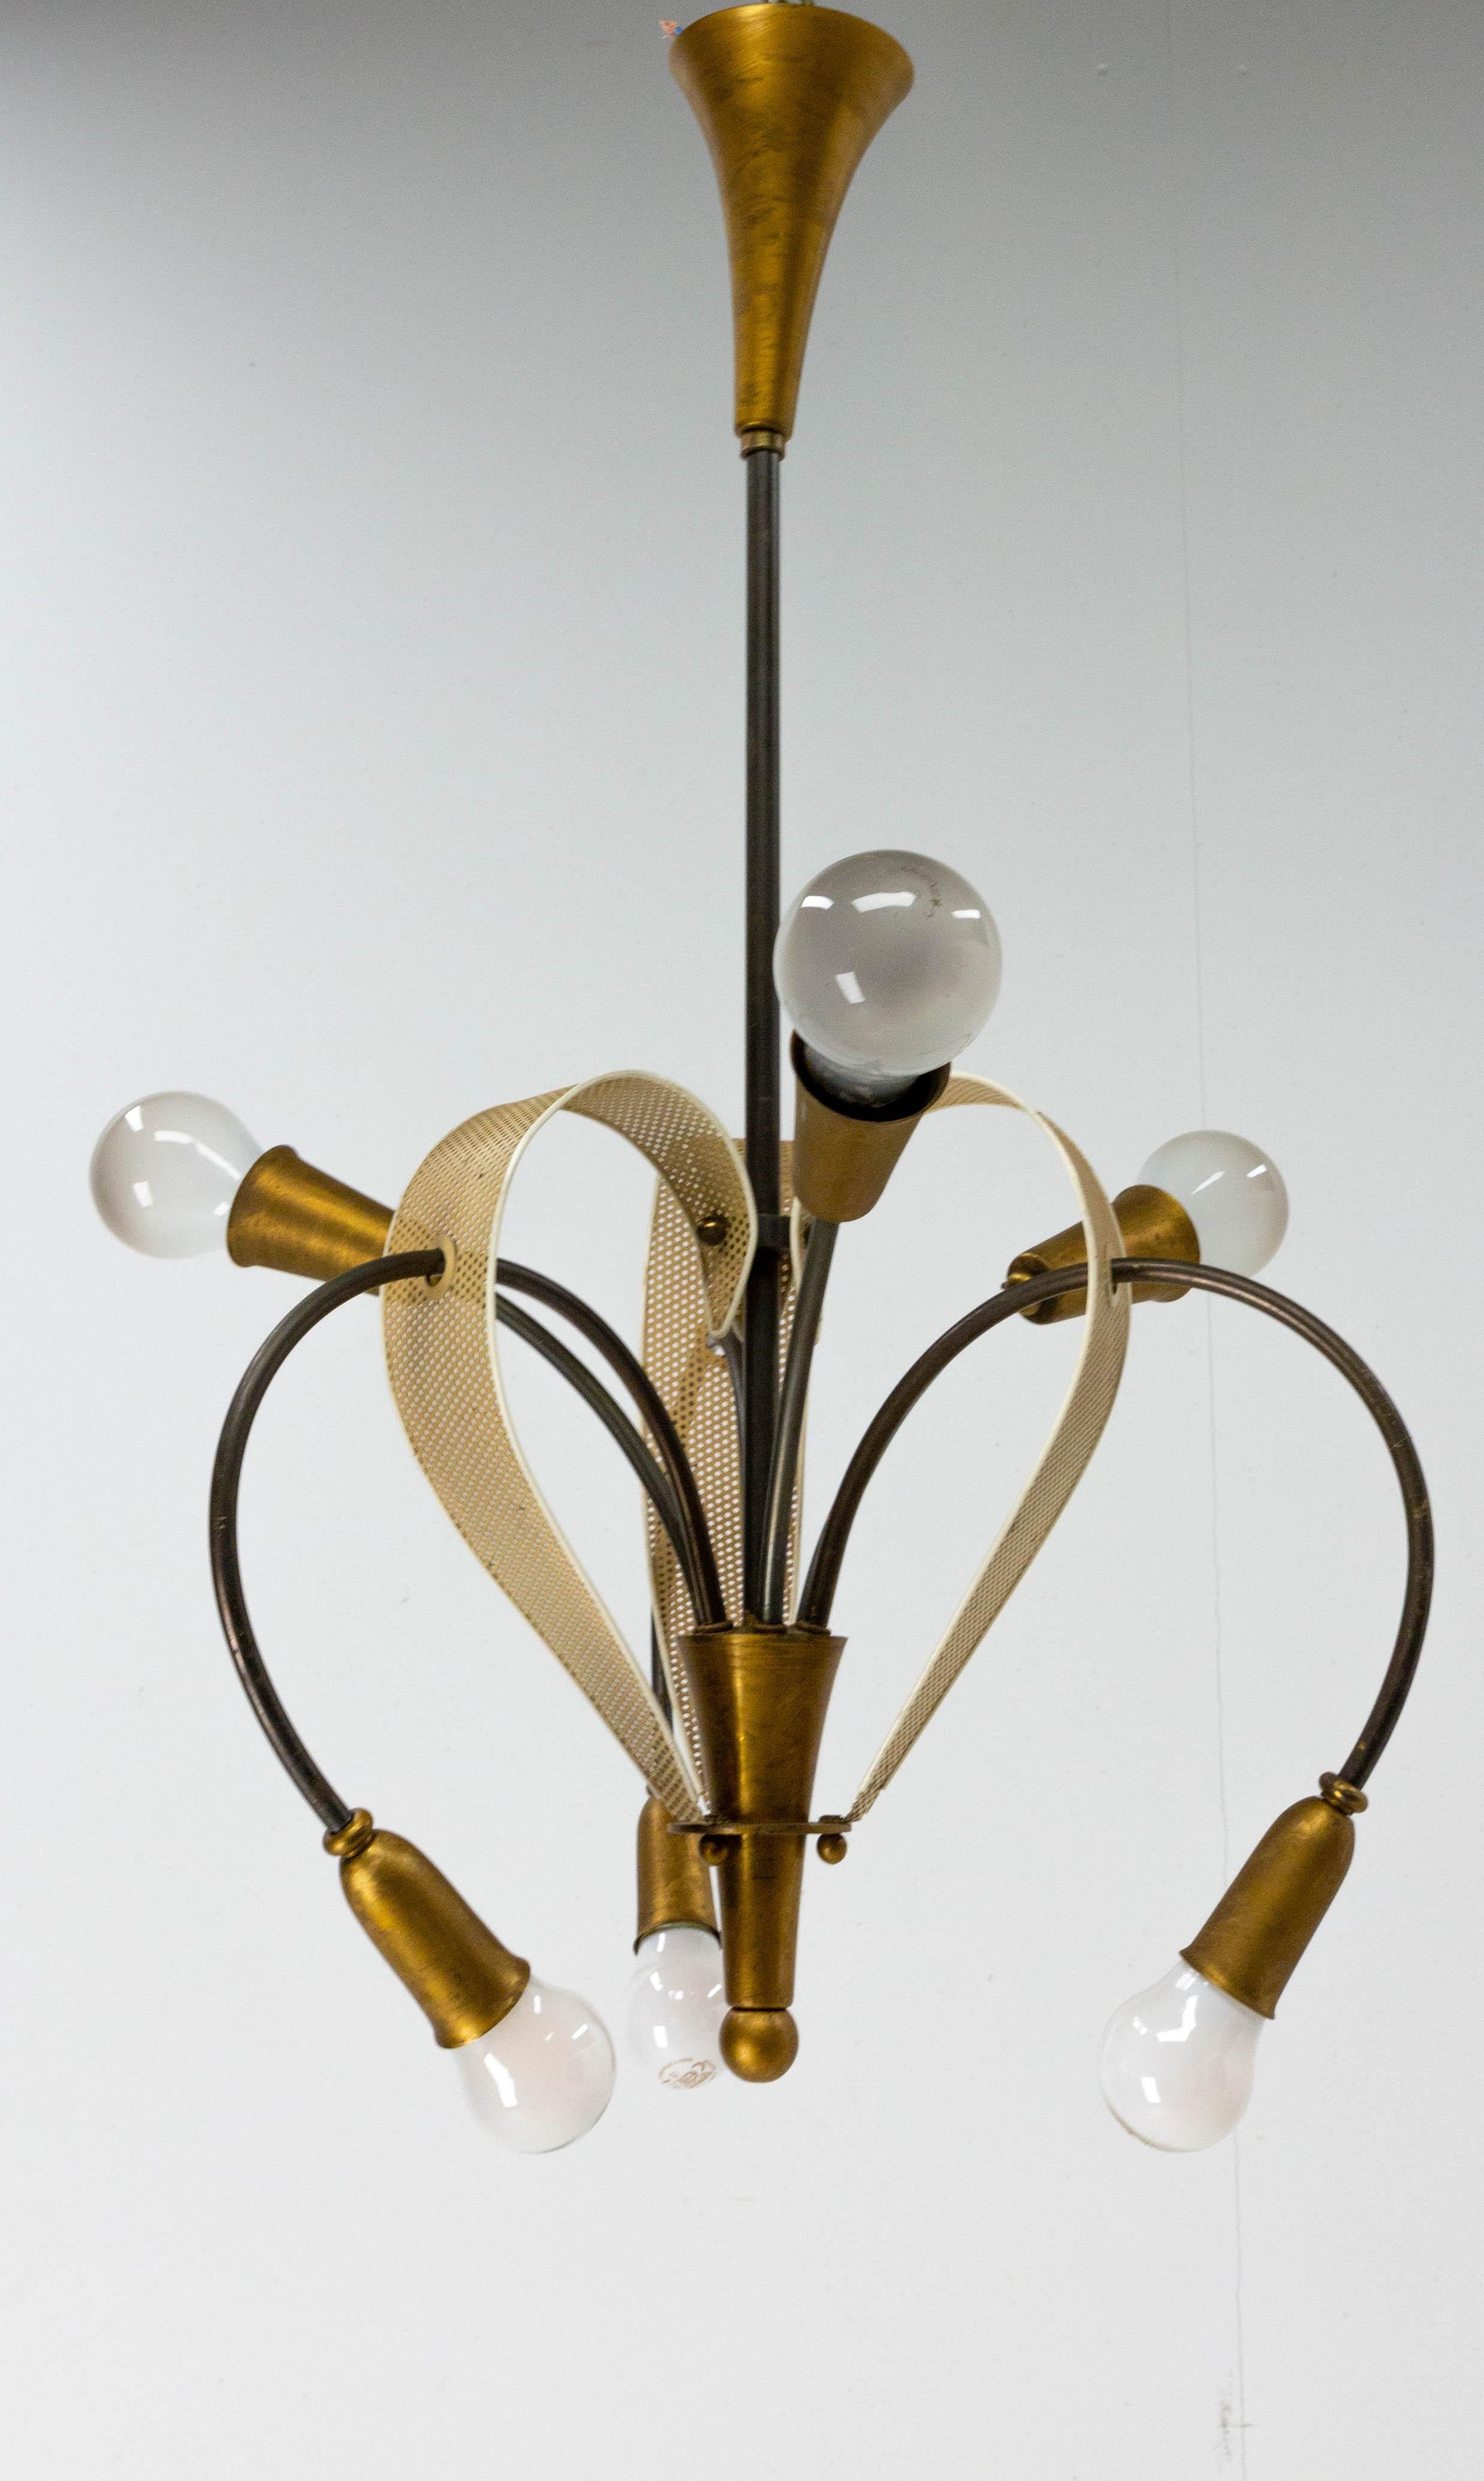 Ceiling pendant by Pierre Guariche for Disderot, France
Lustre in brass and iron 
Chandelier with six light bulbs
The electrification has been completely redone
It is conform to USA and EU or UK standards
Good condition

Shipping:
Diameter